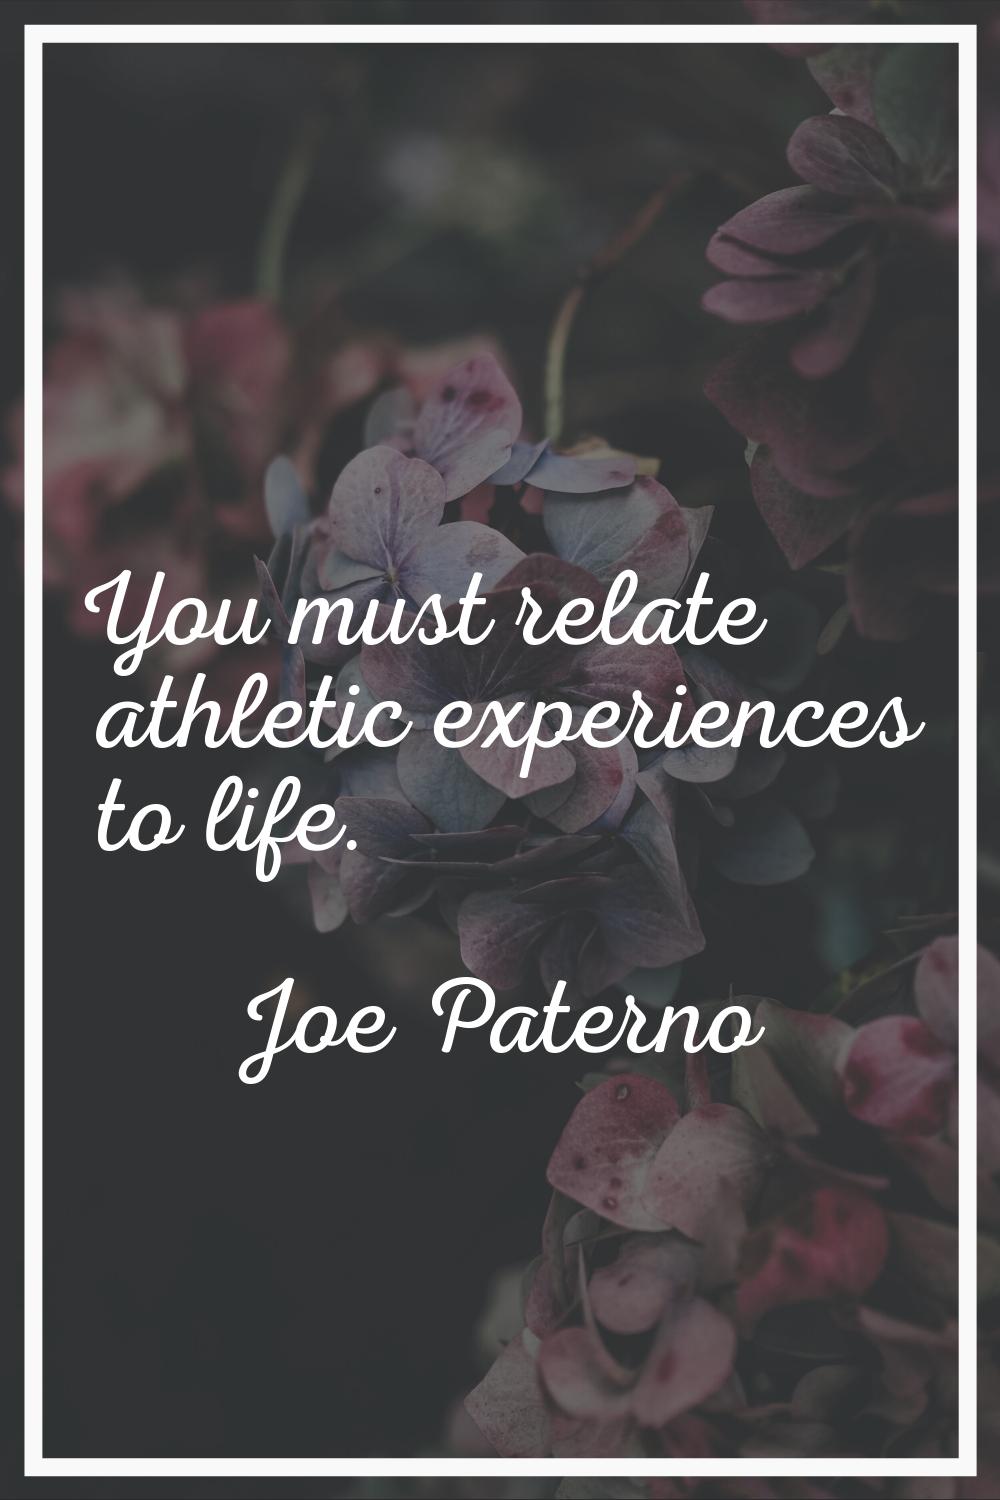 You must relate athletic experiences to life.